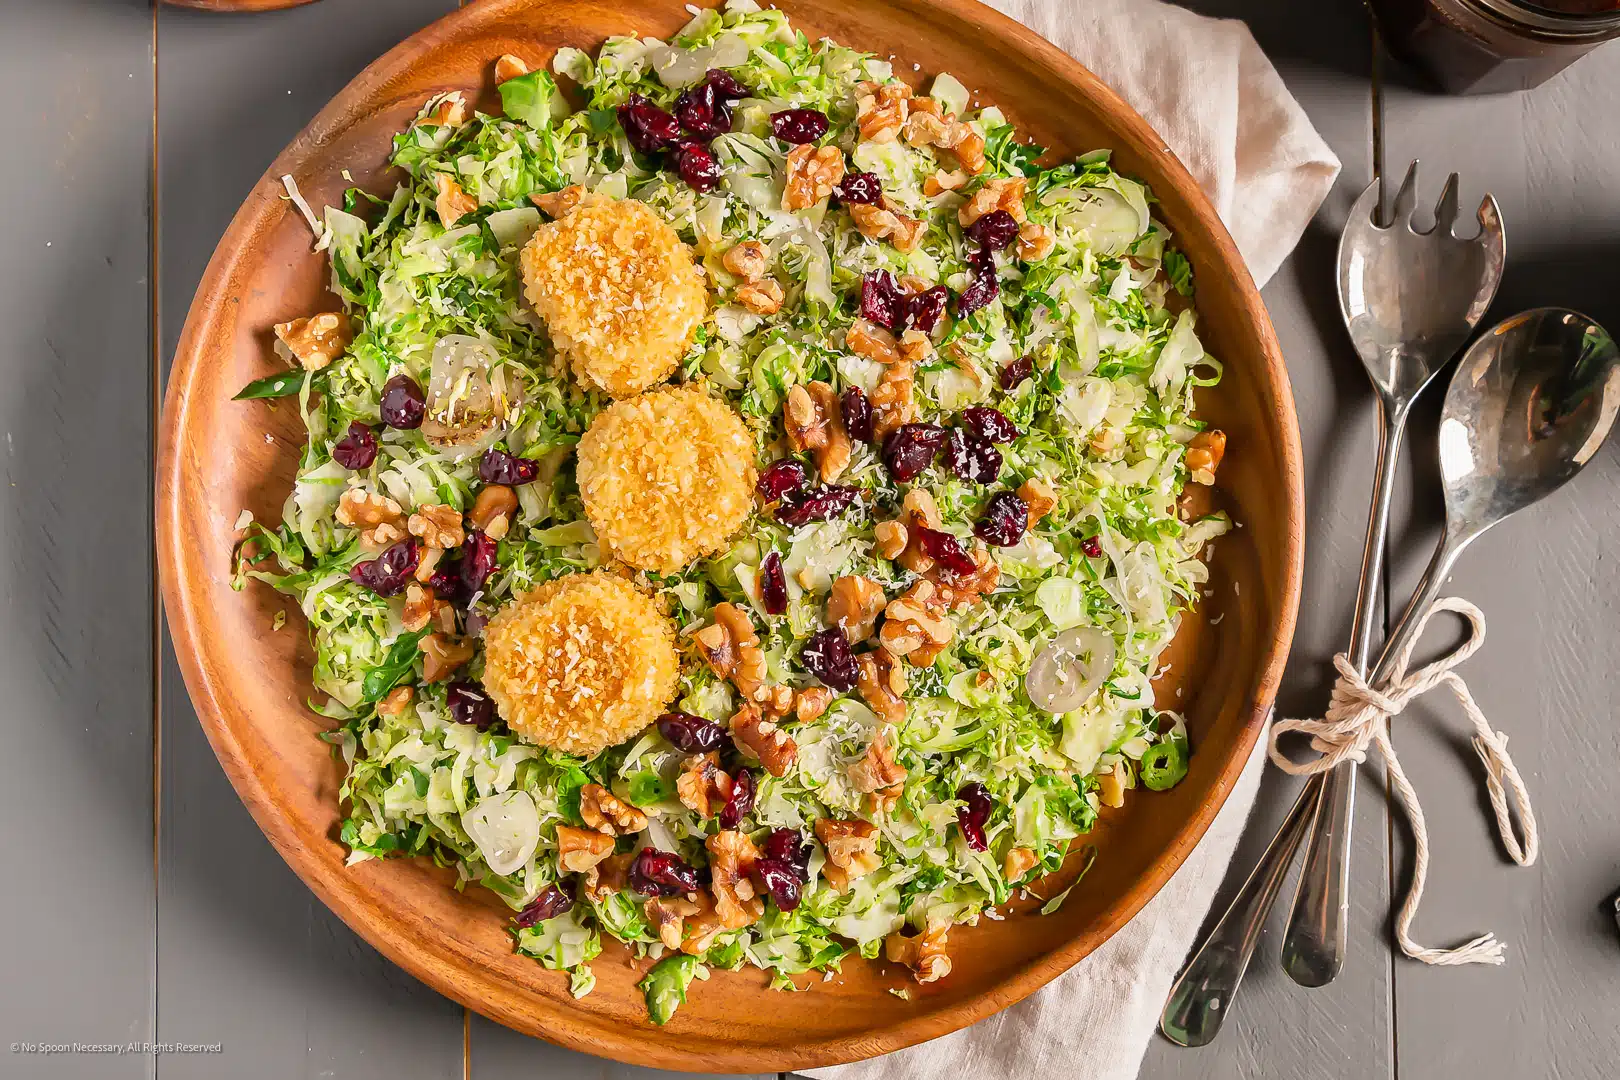 Overhead photo of a shaved brussels sprouts salad with cranberries, walnuts and baked goat cheese.